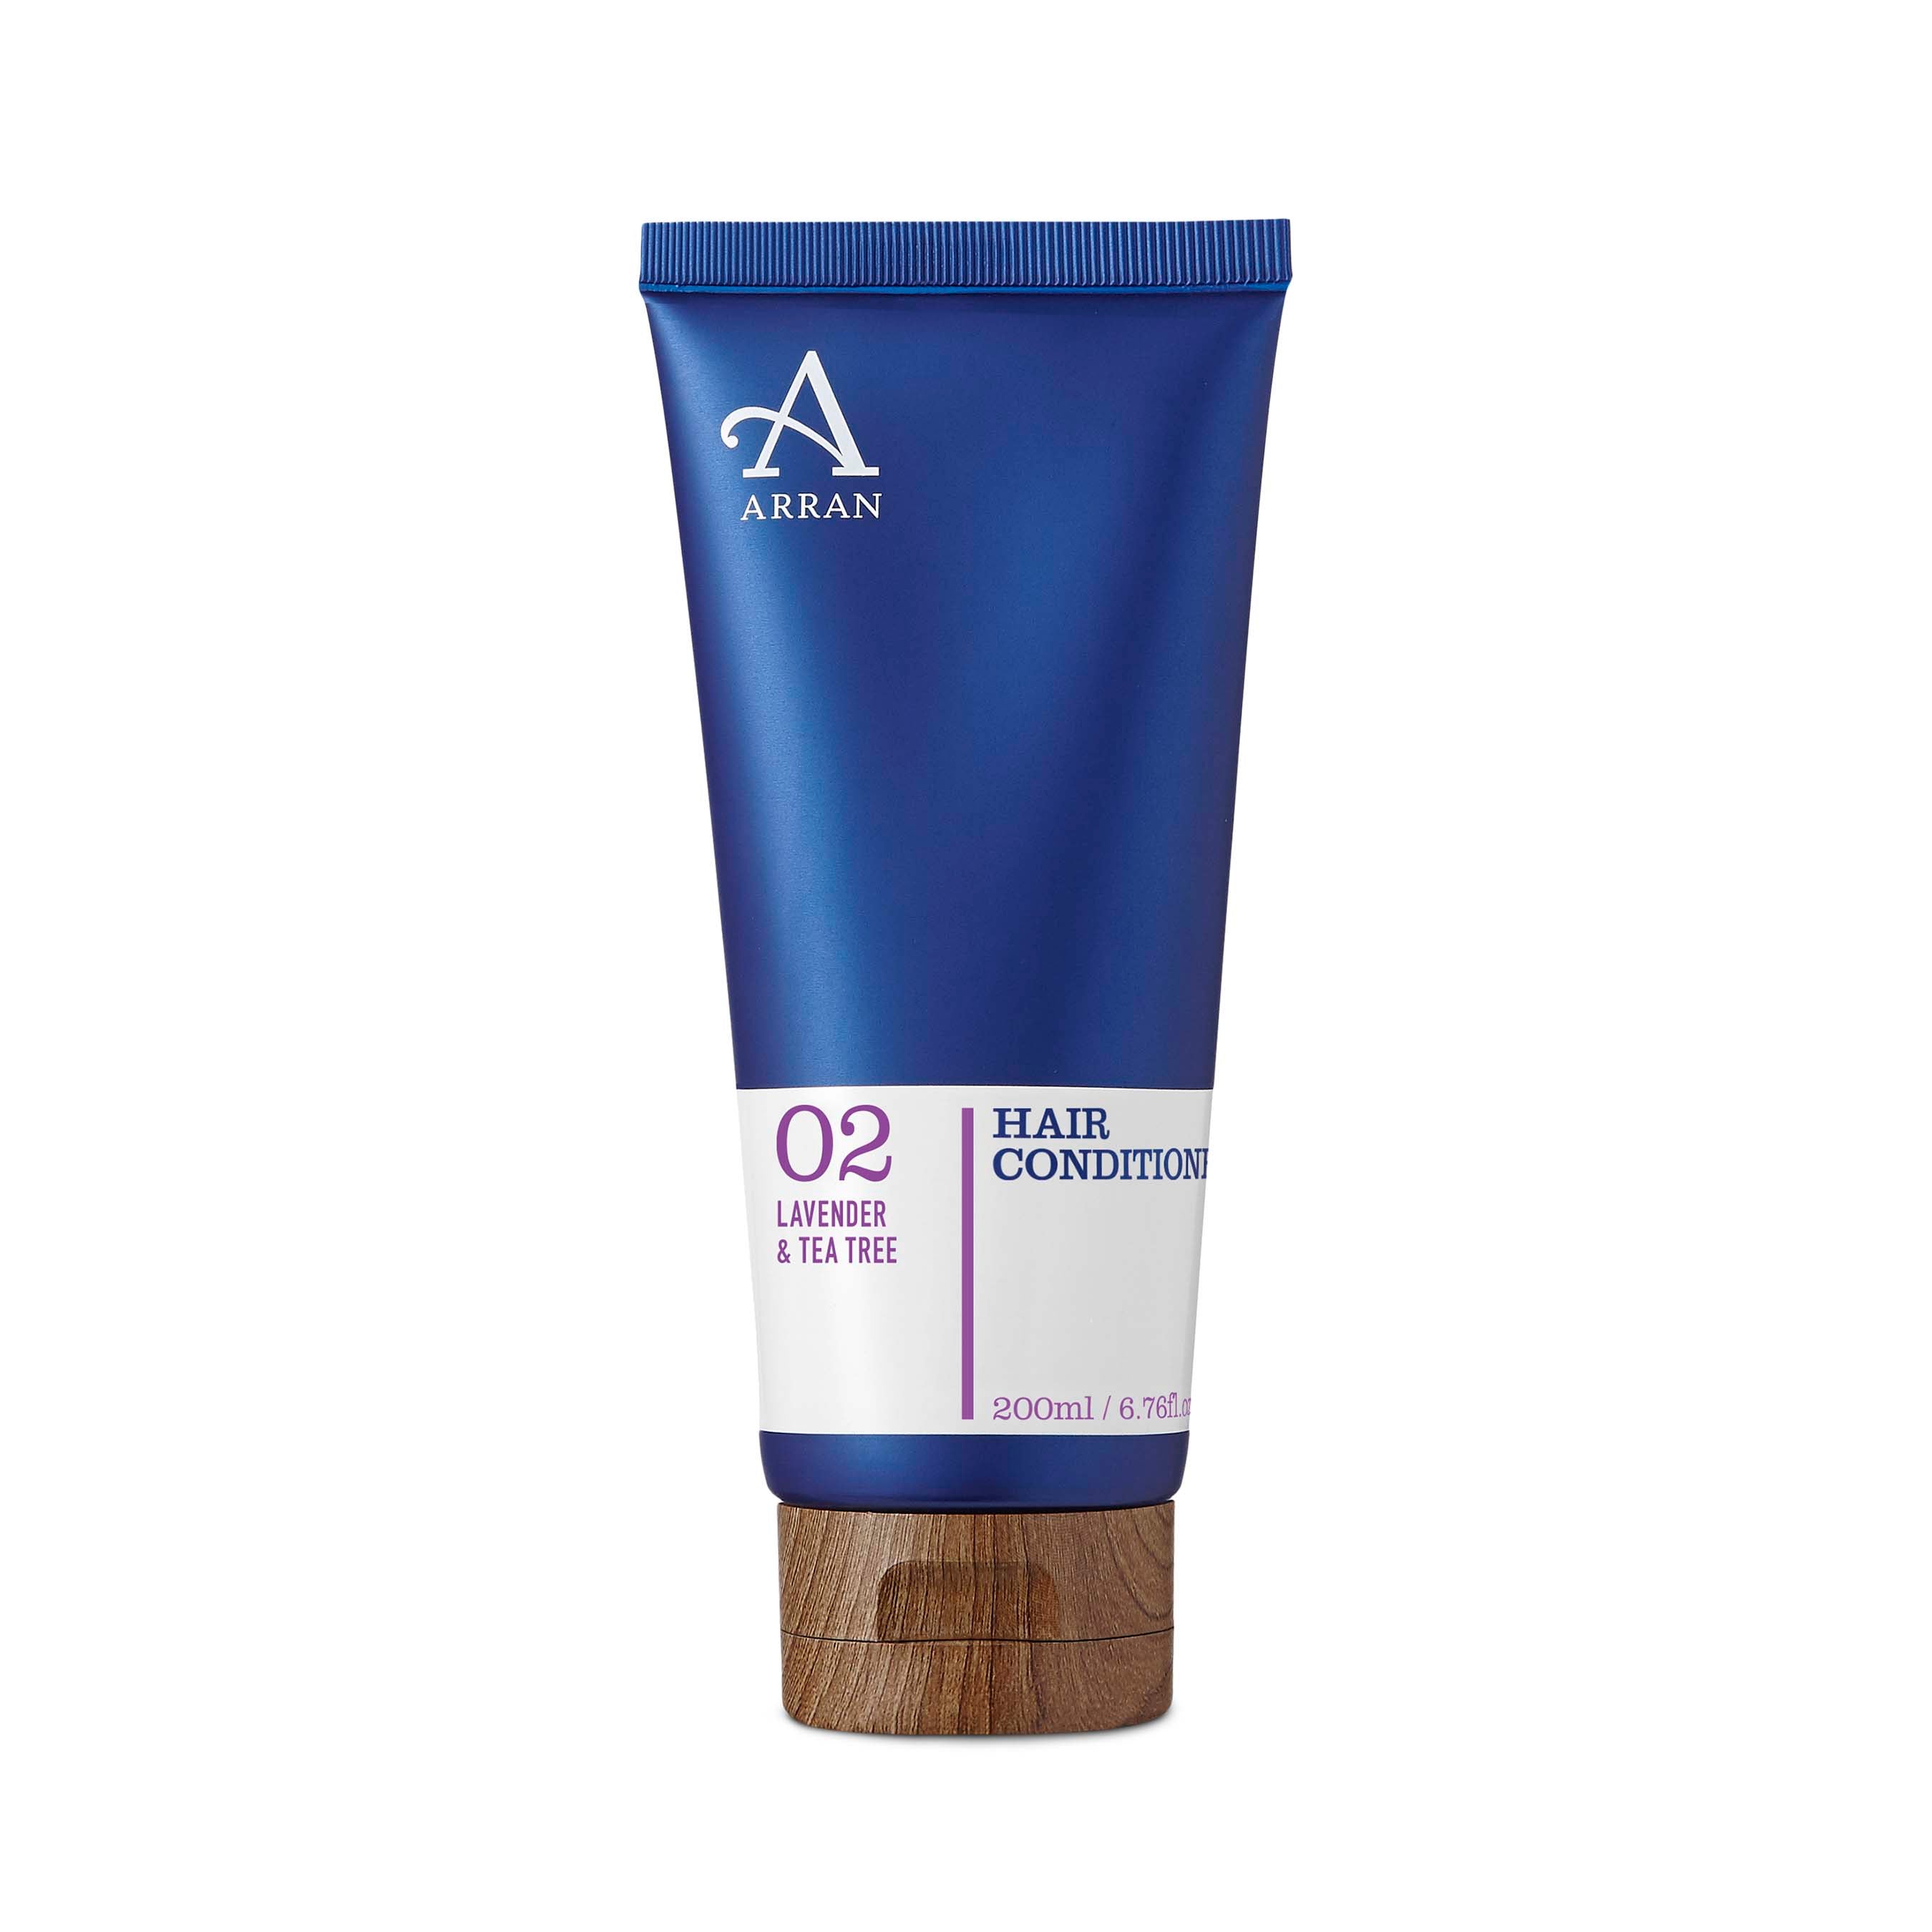 An image of ARRAN Apothecary Lavender & Tea Tree Conditioner 200ml | Made in Scotland | Lave...